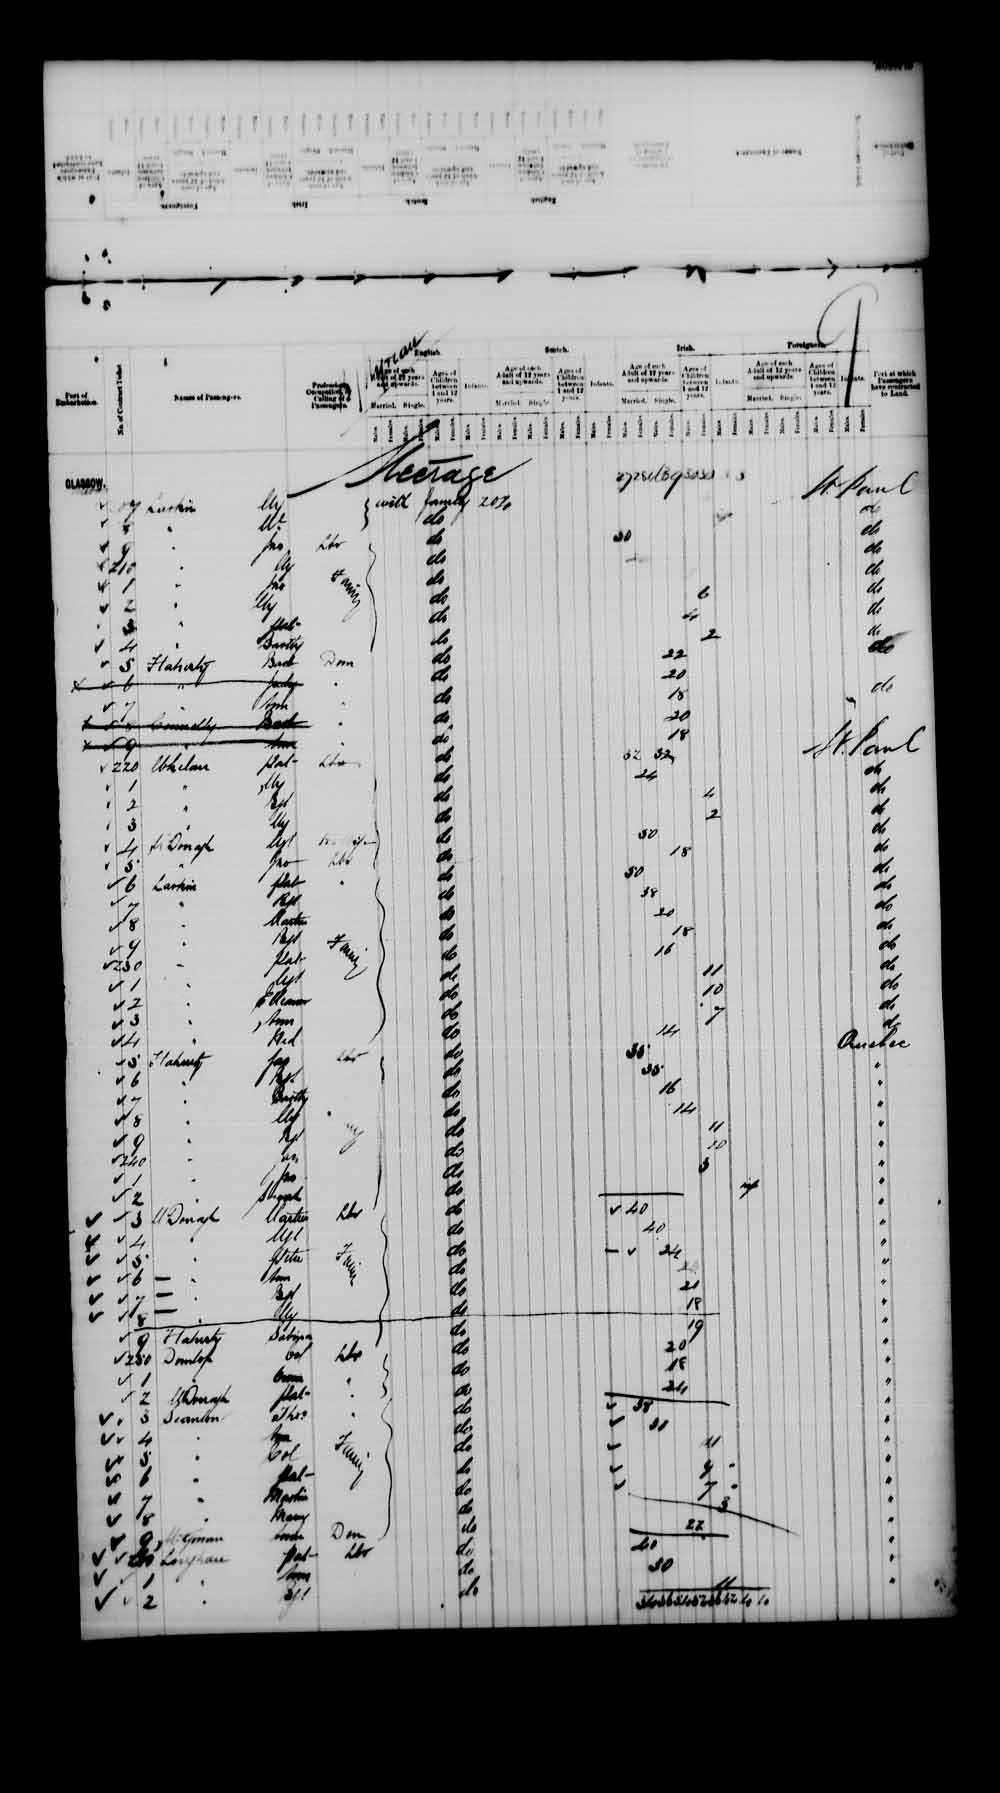 Digitized page of Passenger Lists for Image No.: e003542787